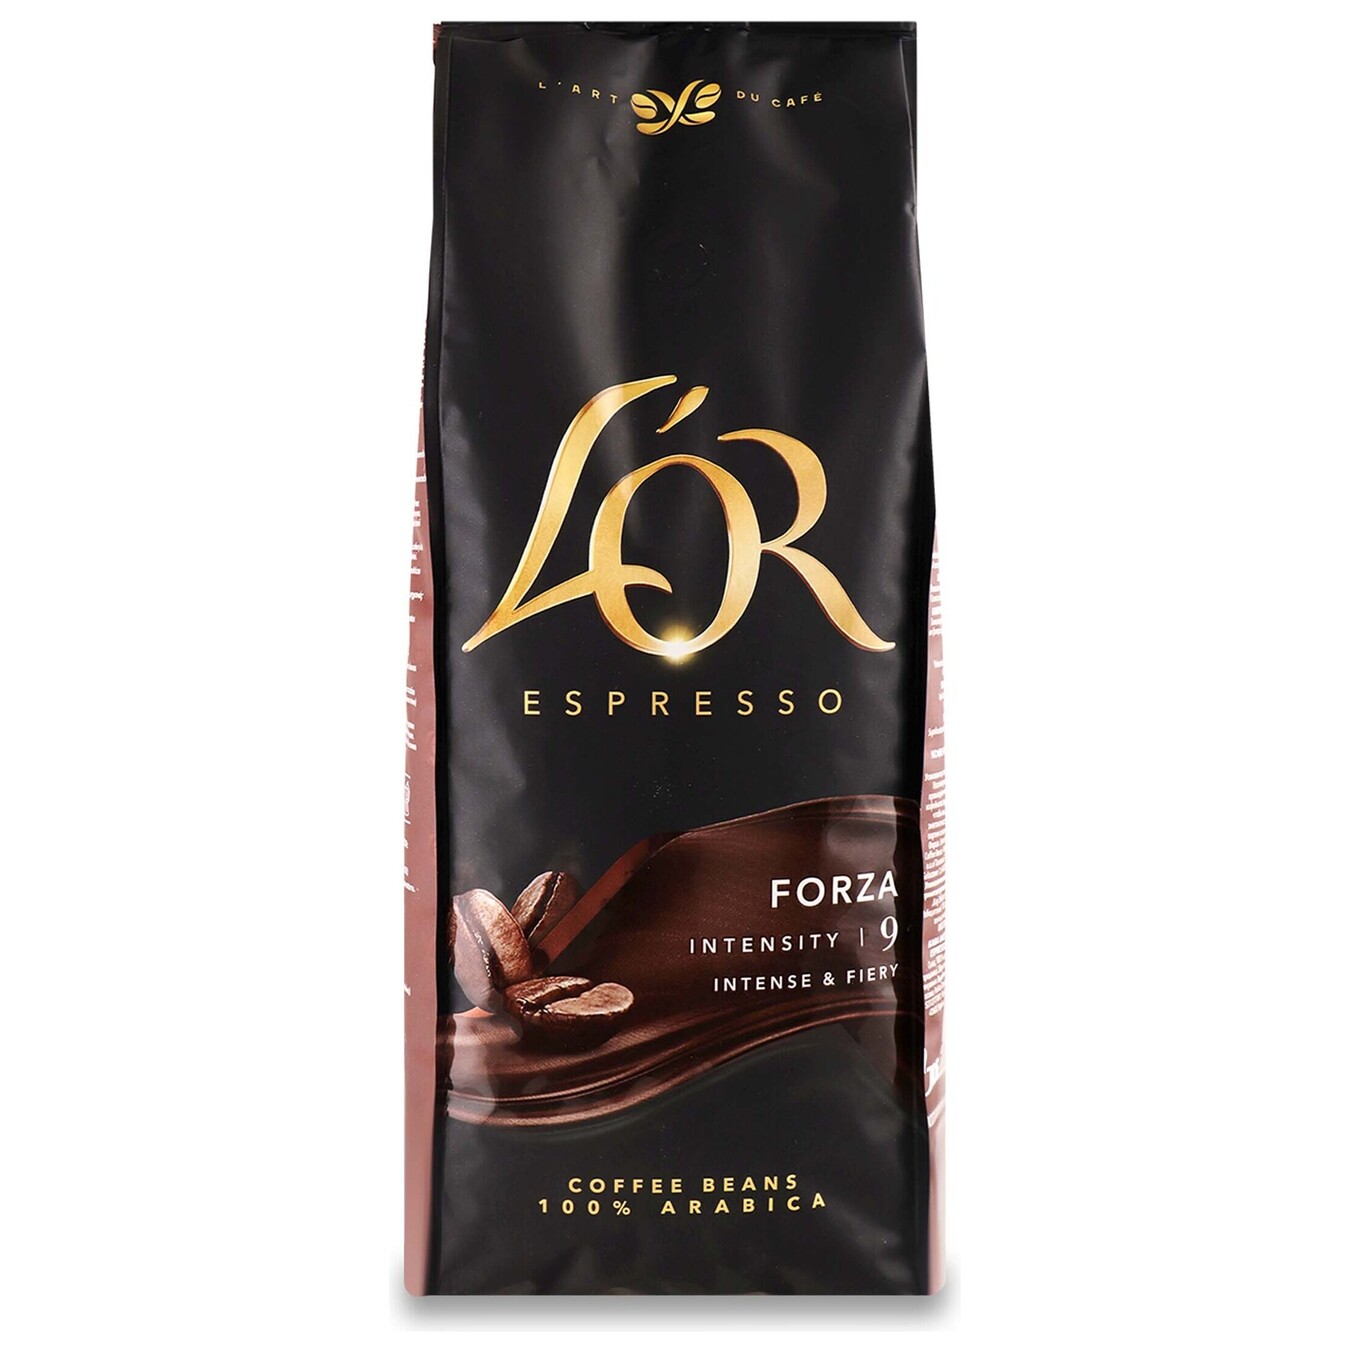 L'OR natural roasted Espresso Forza coffee beans 1000g